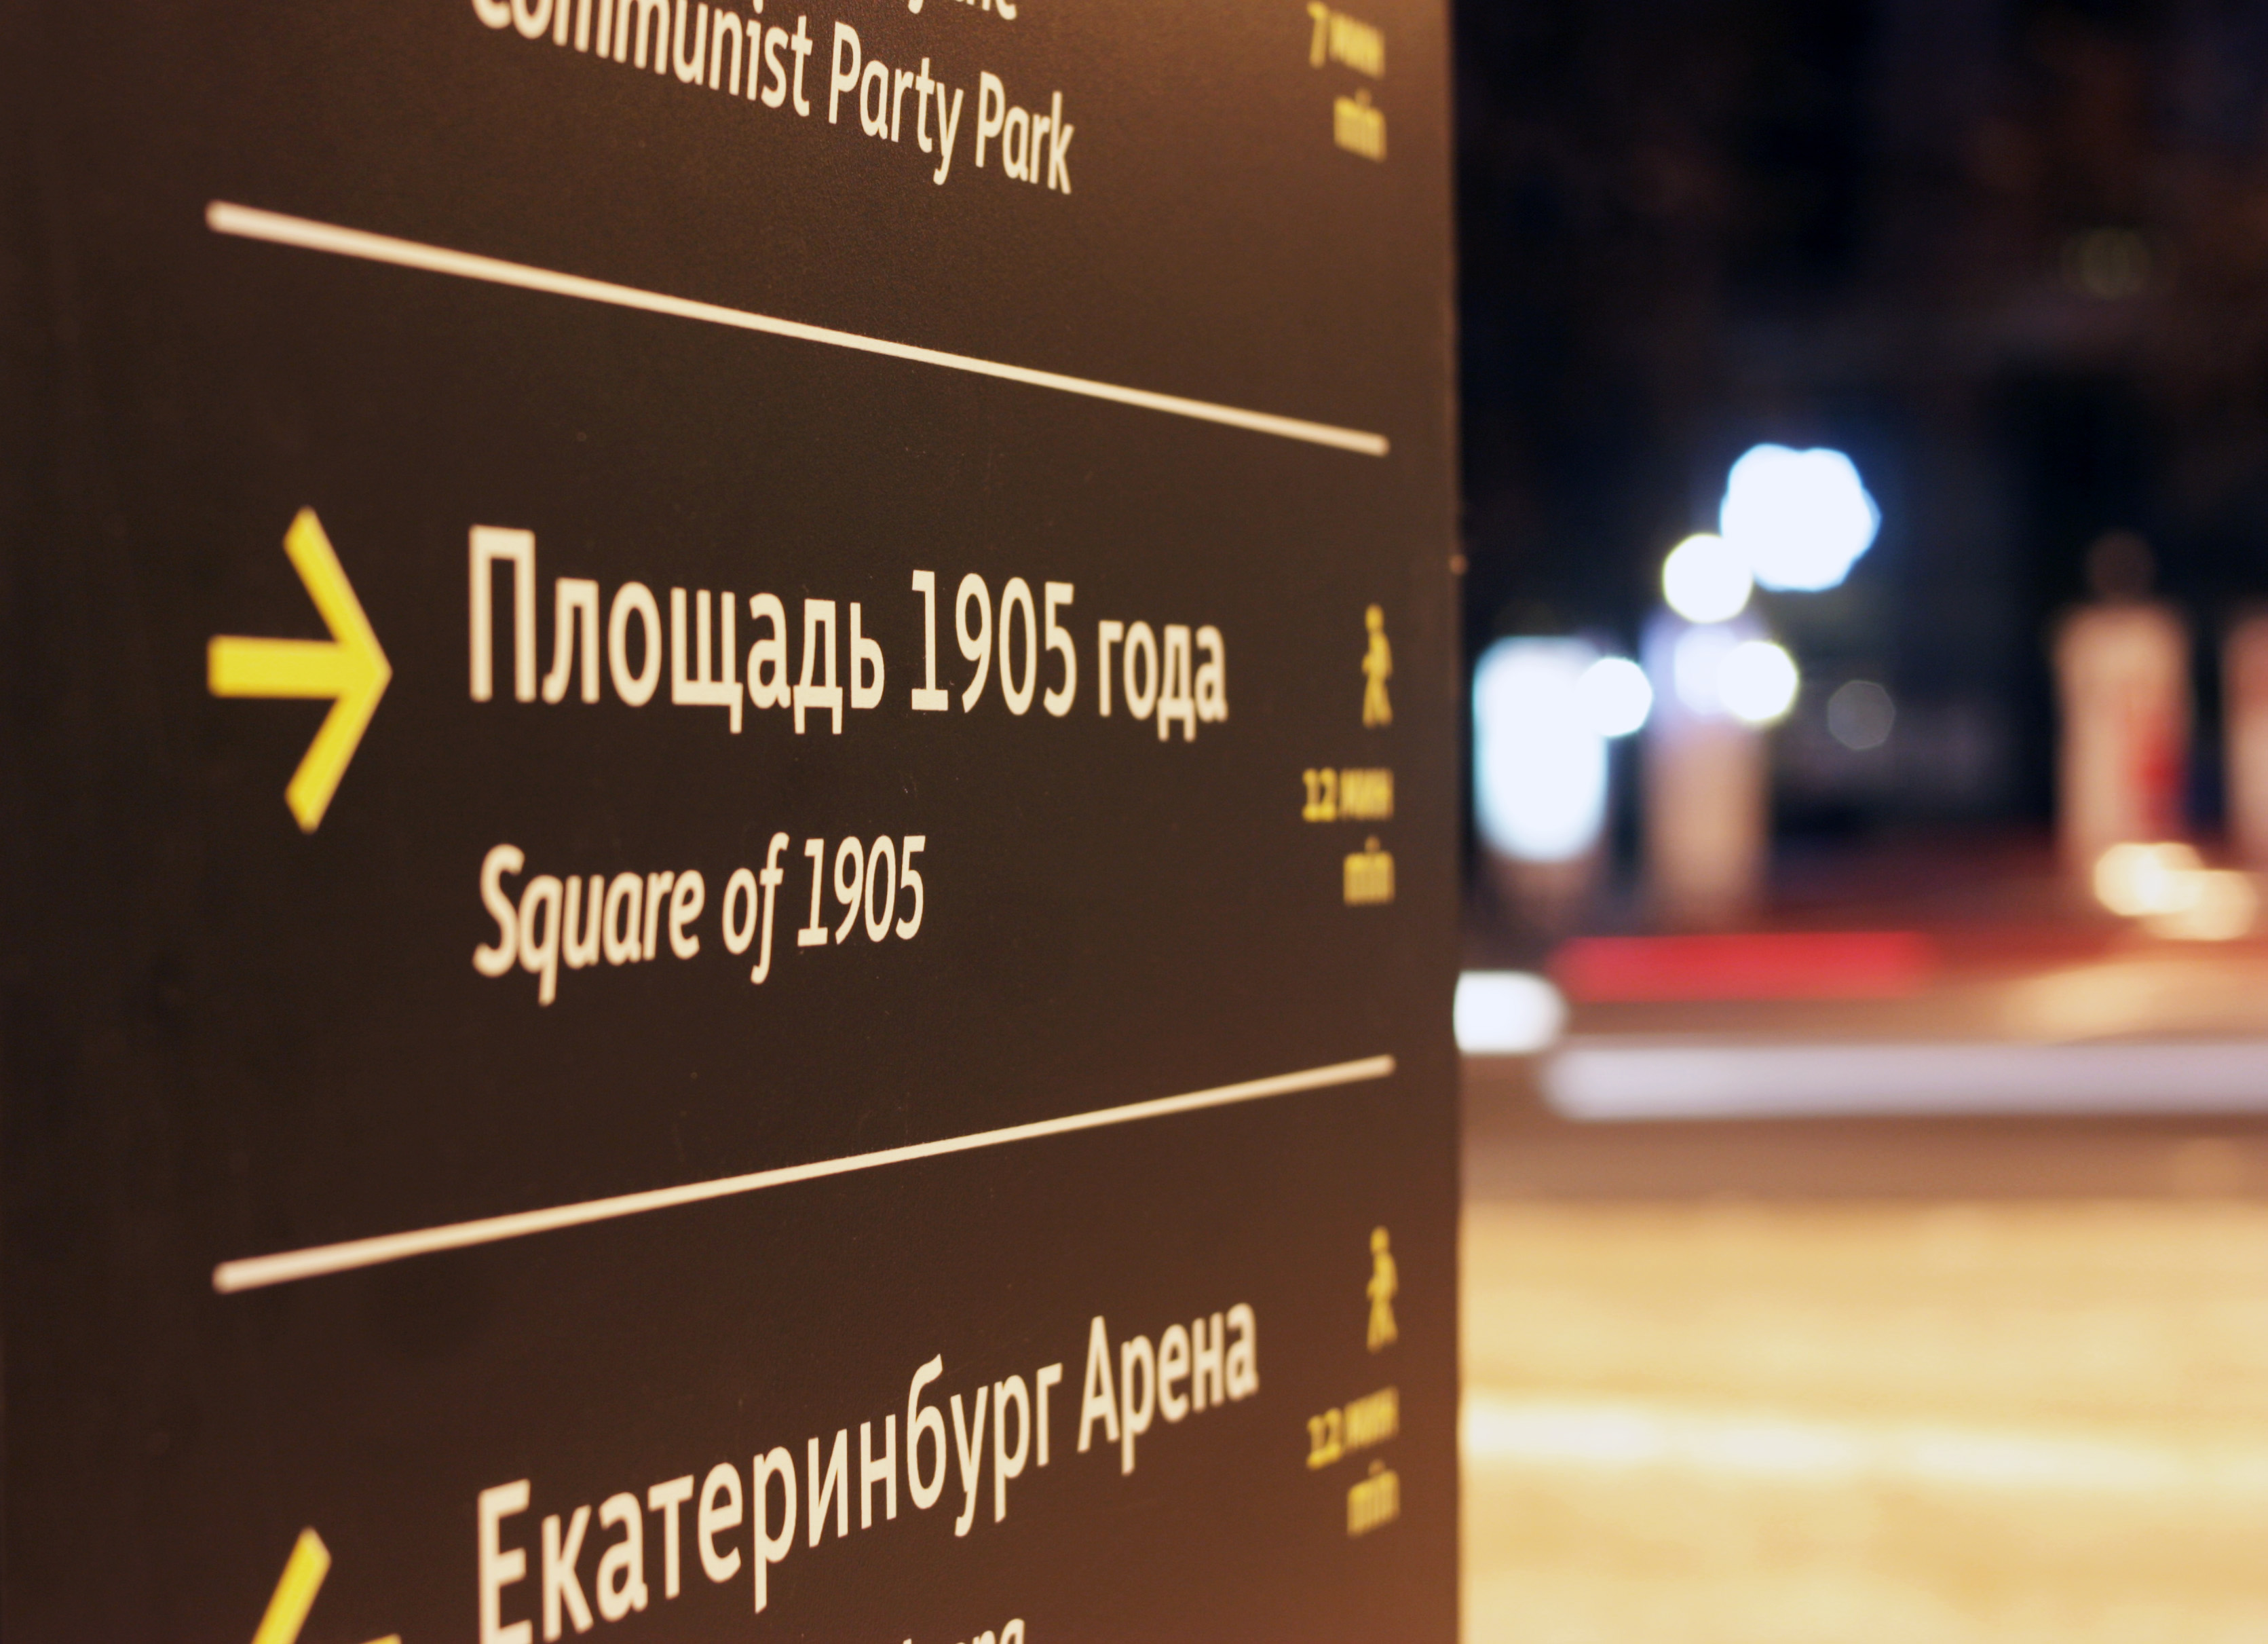 Yekaterinburg Citizens and Guests Appraise Functionality of Shvabe Information Board